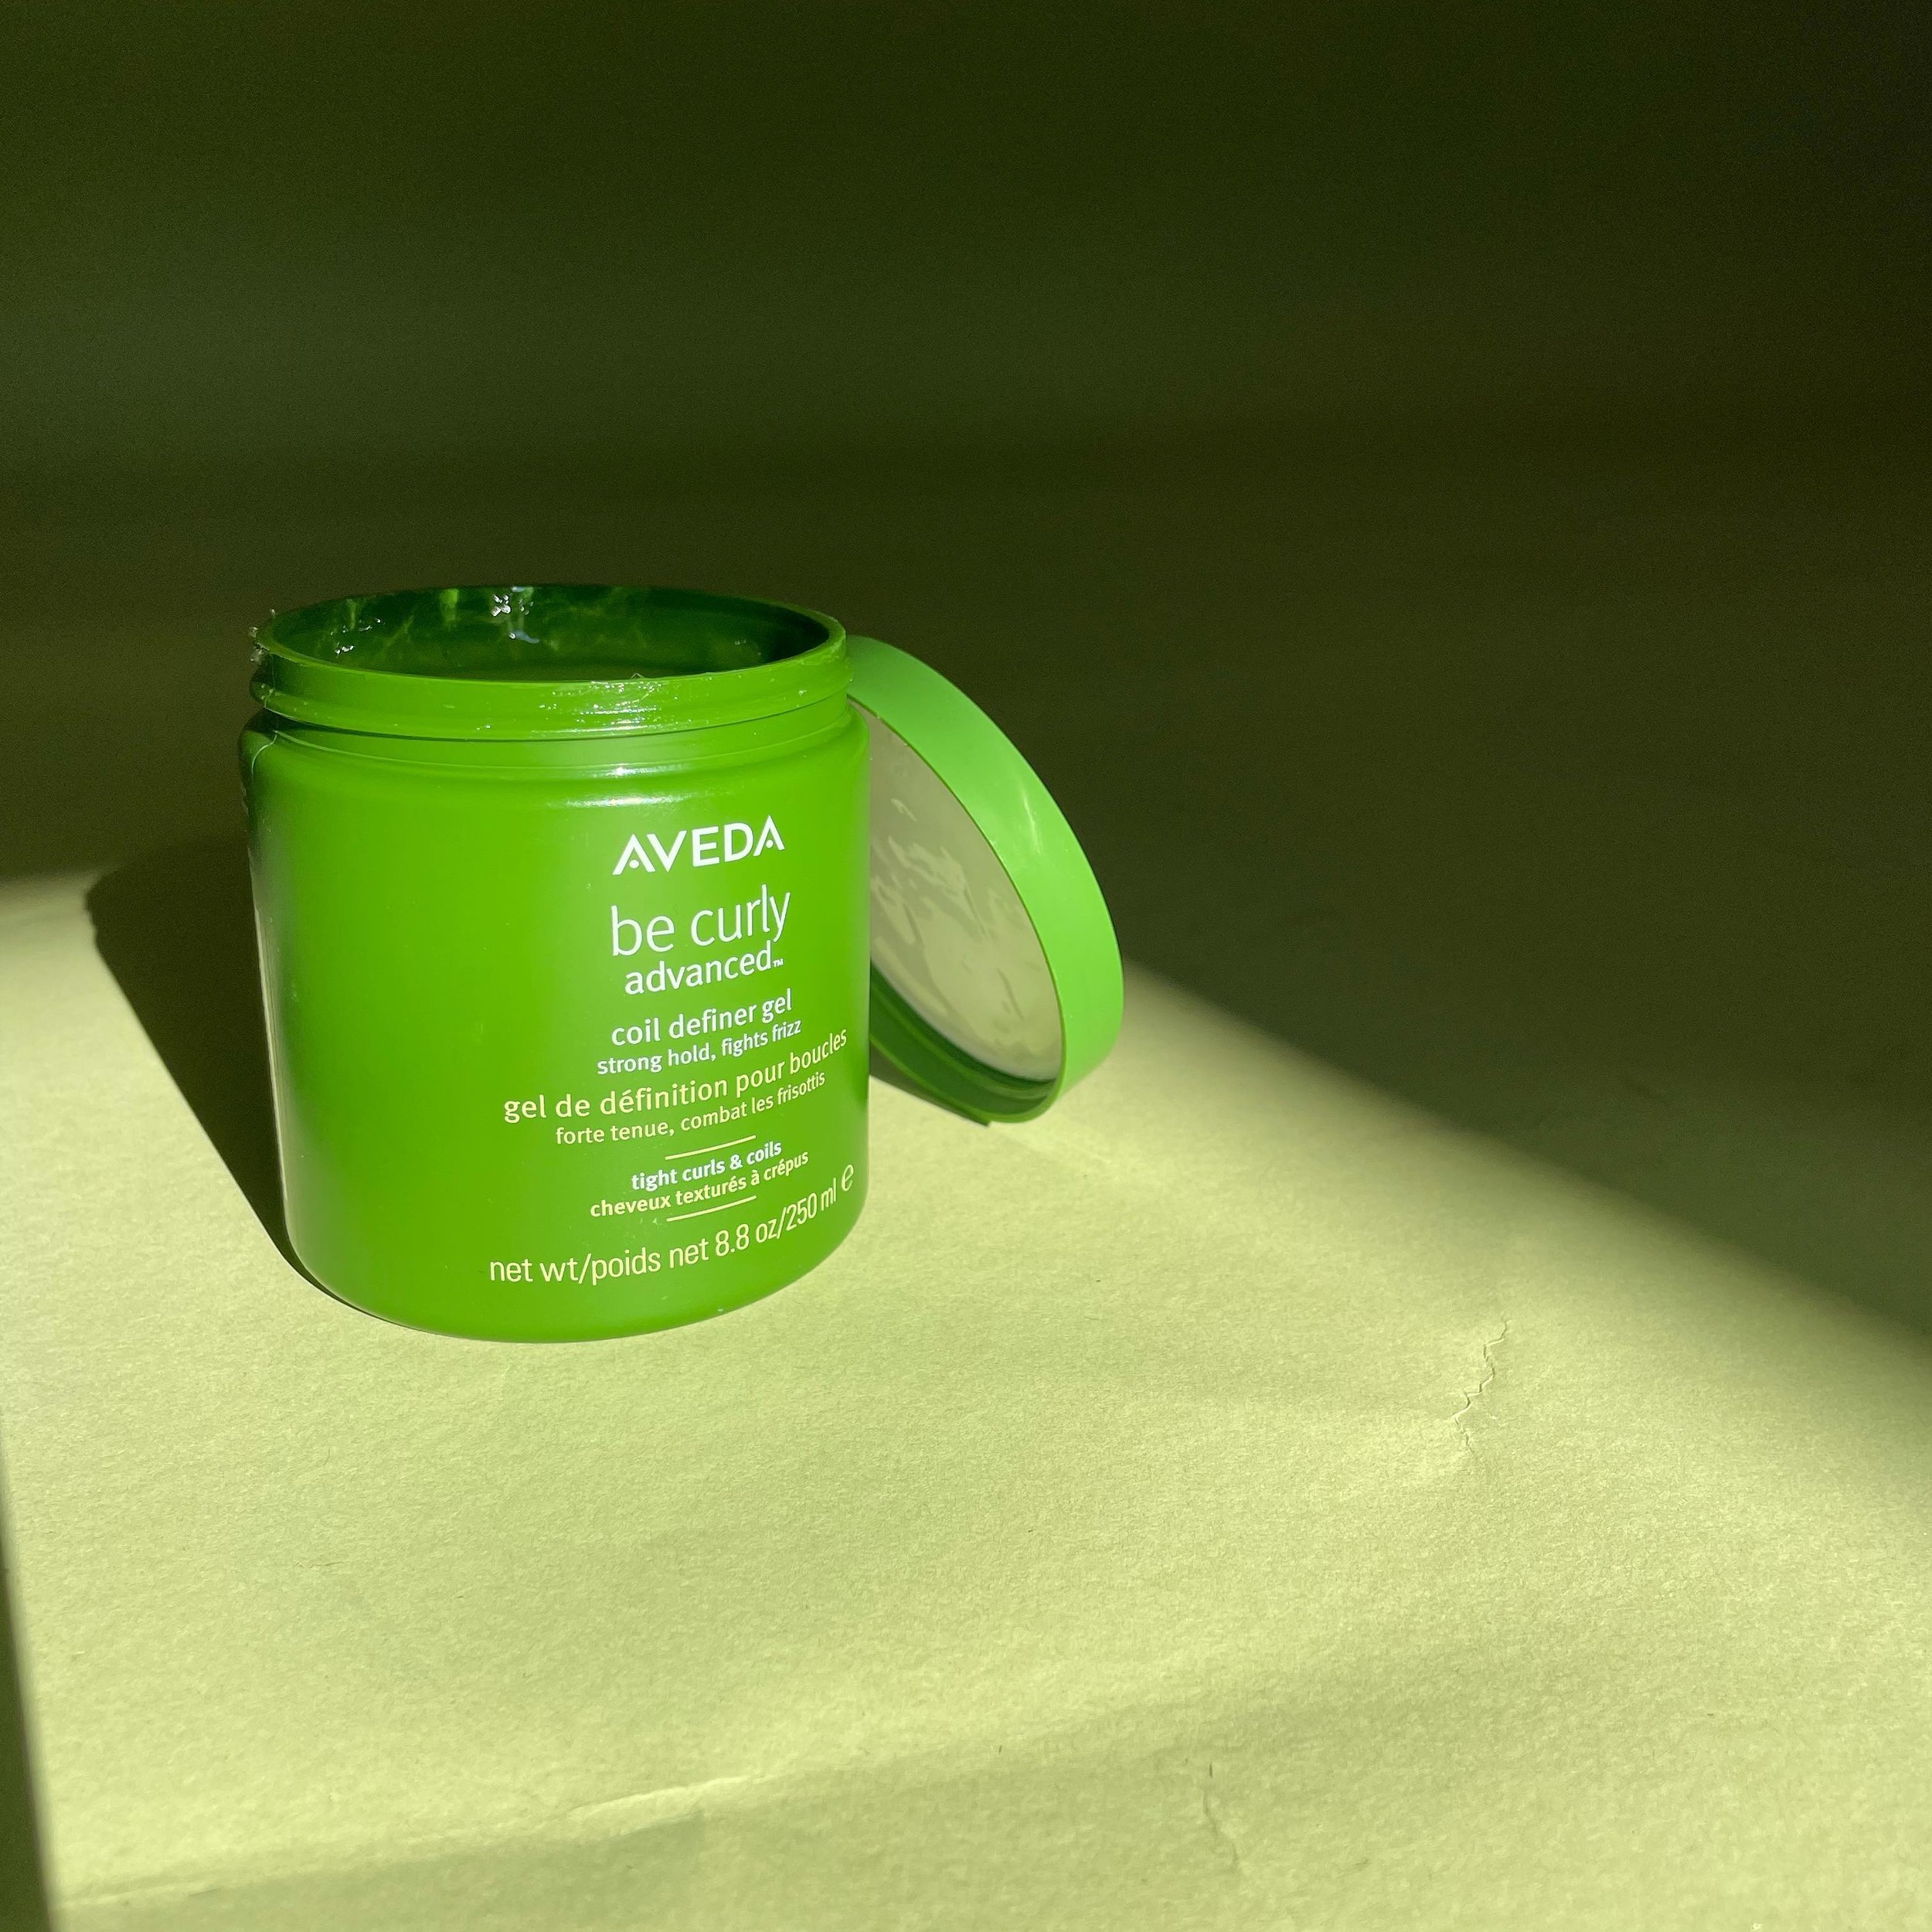 *new product alert* 
Be Curly Advanced Coil Definer Gel 🌿

It&rsquo;s hydrating and leaves the hair silky smooth while providing definition and shine without the cast or &ldquo;crunchiness&rdquo;. 

#aveda #avedaartist #avedasalon #vegansalon #curly